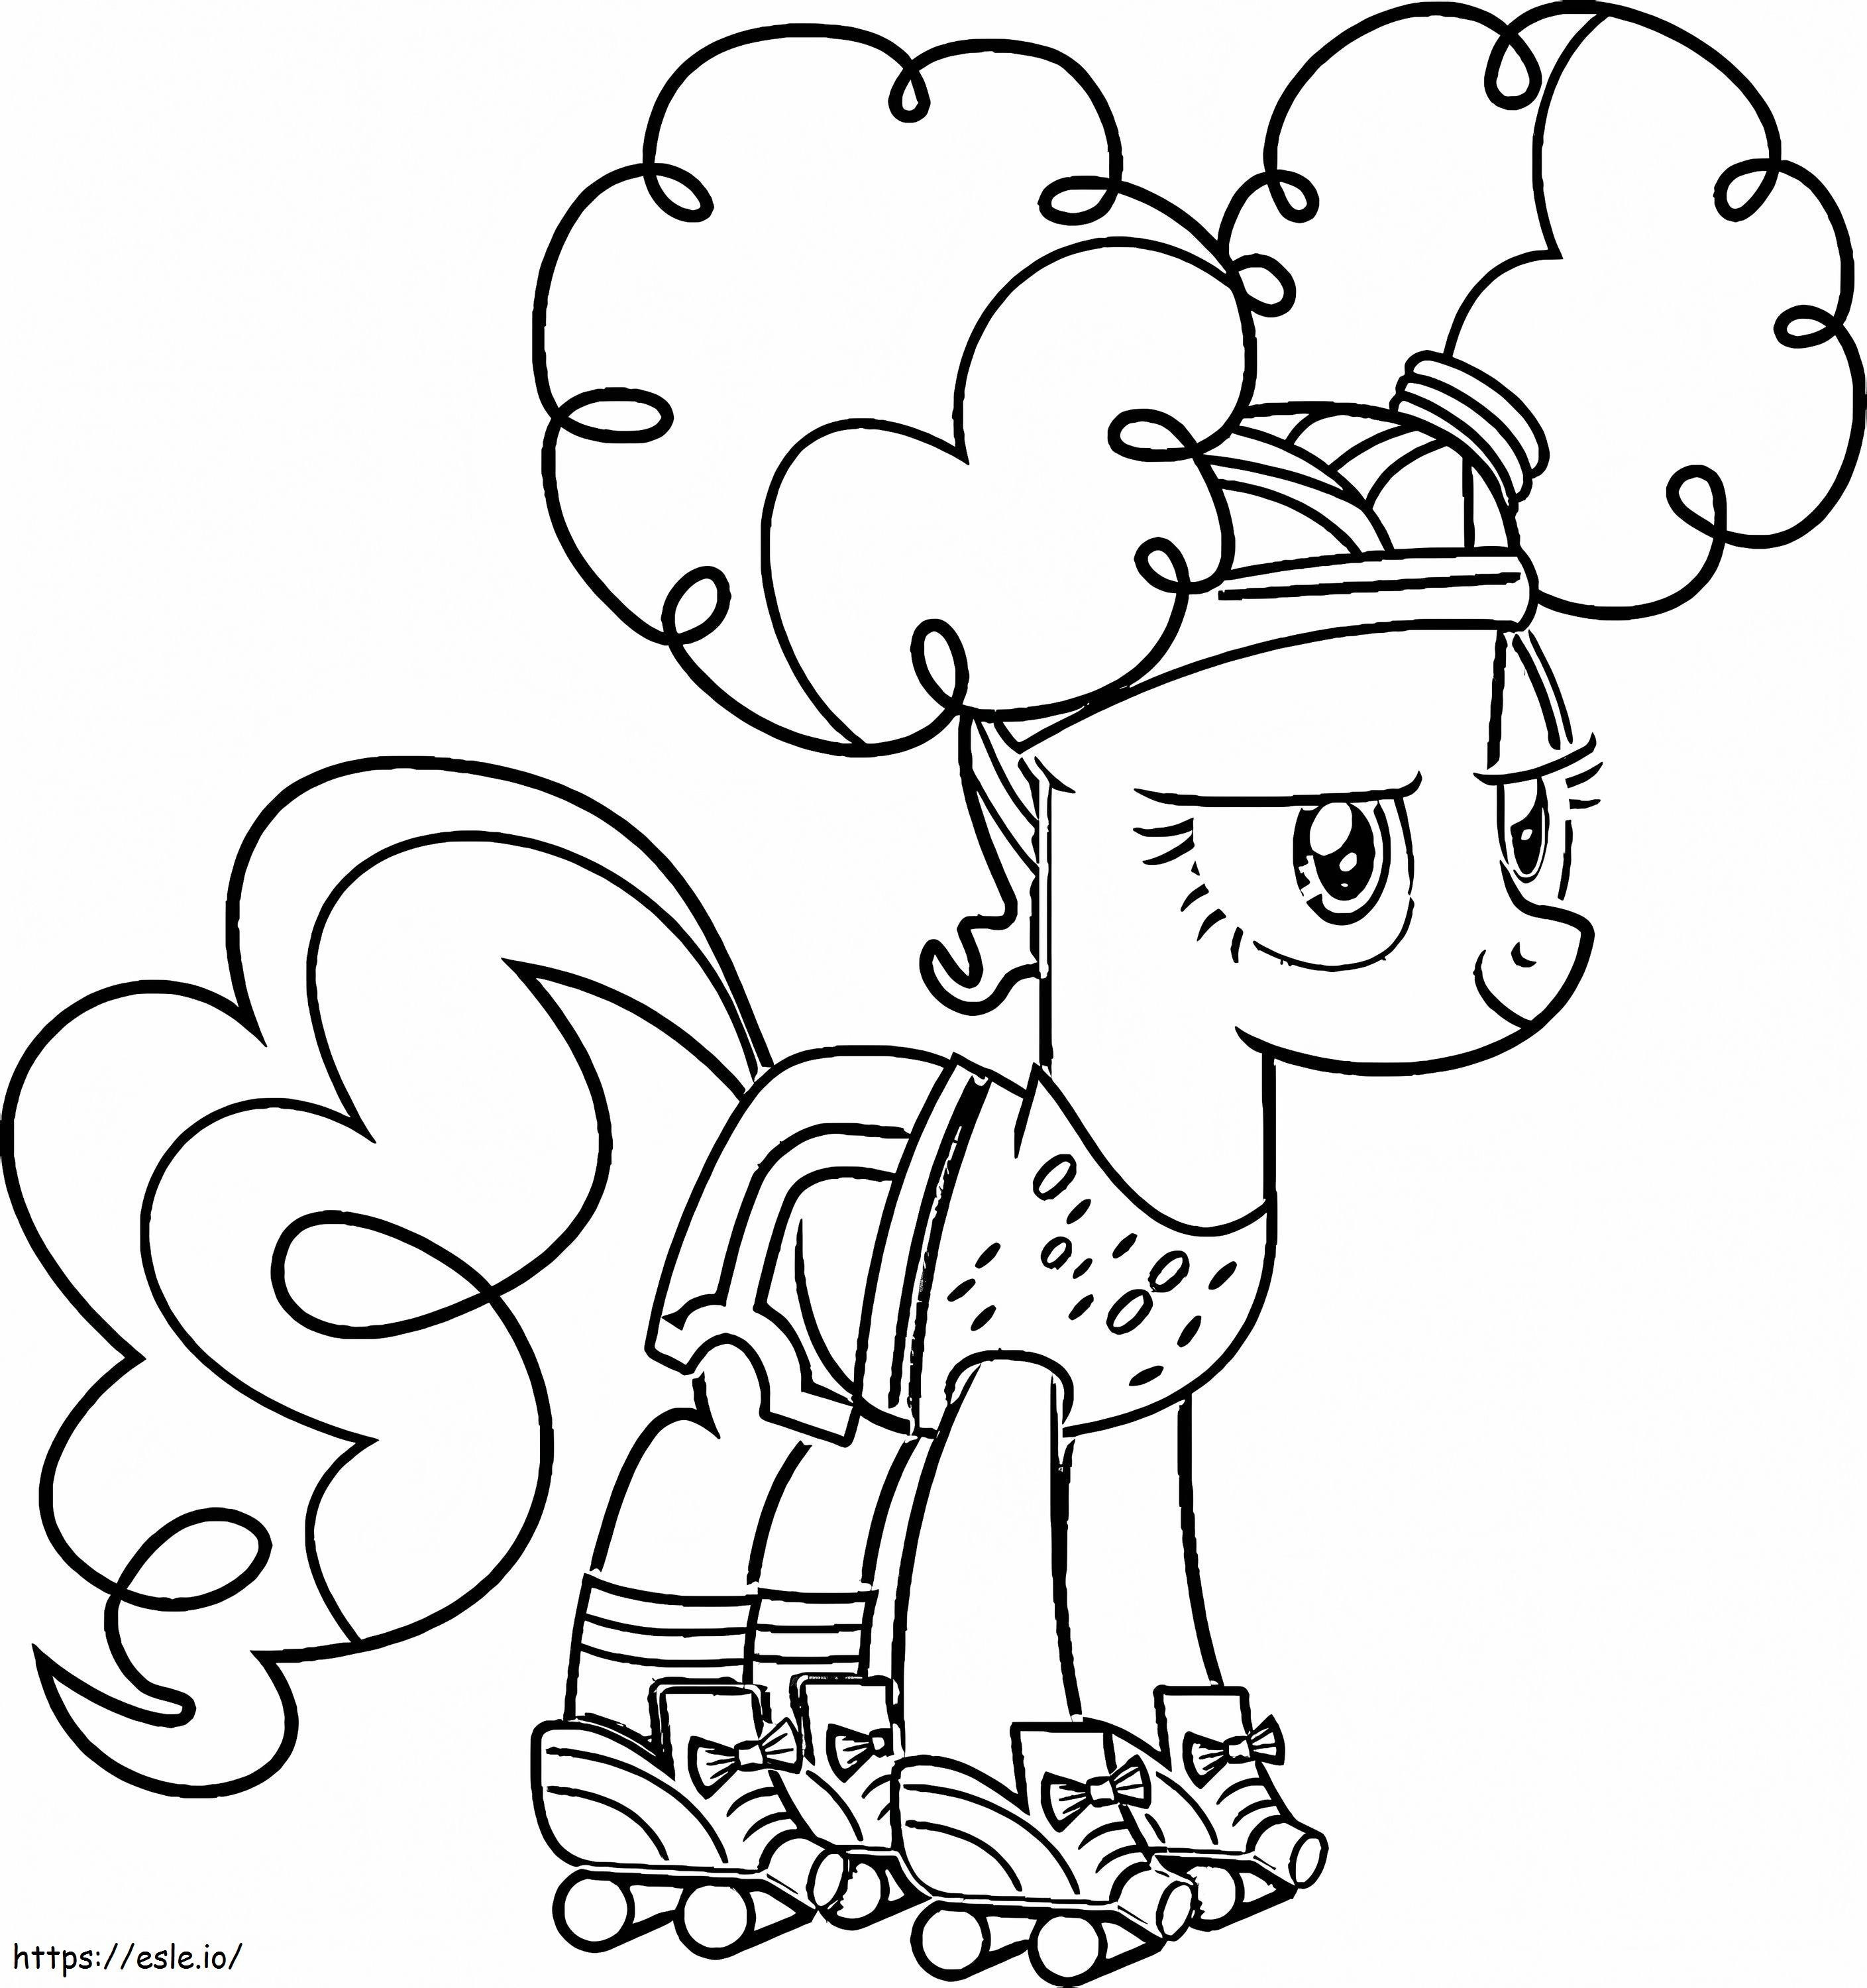 Pinkie Pie On Rollers coloring page